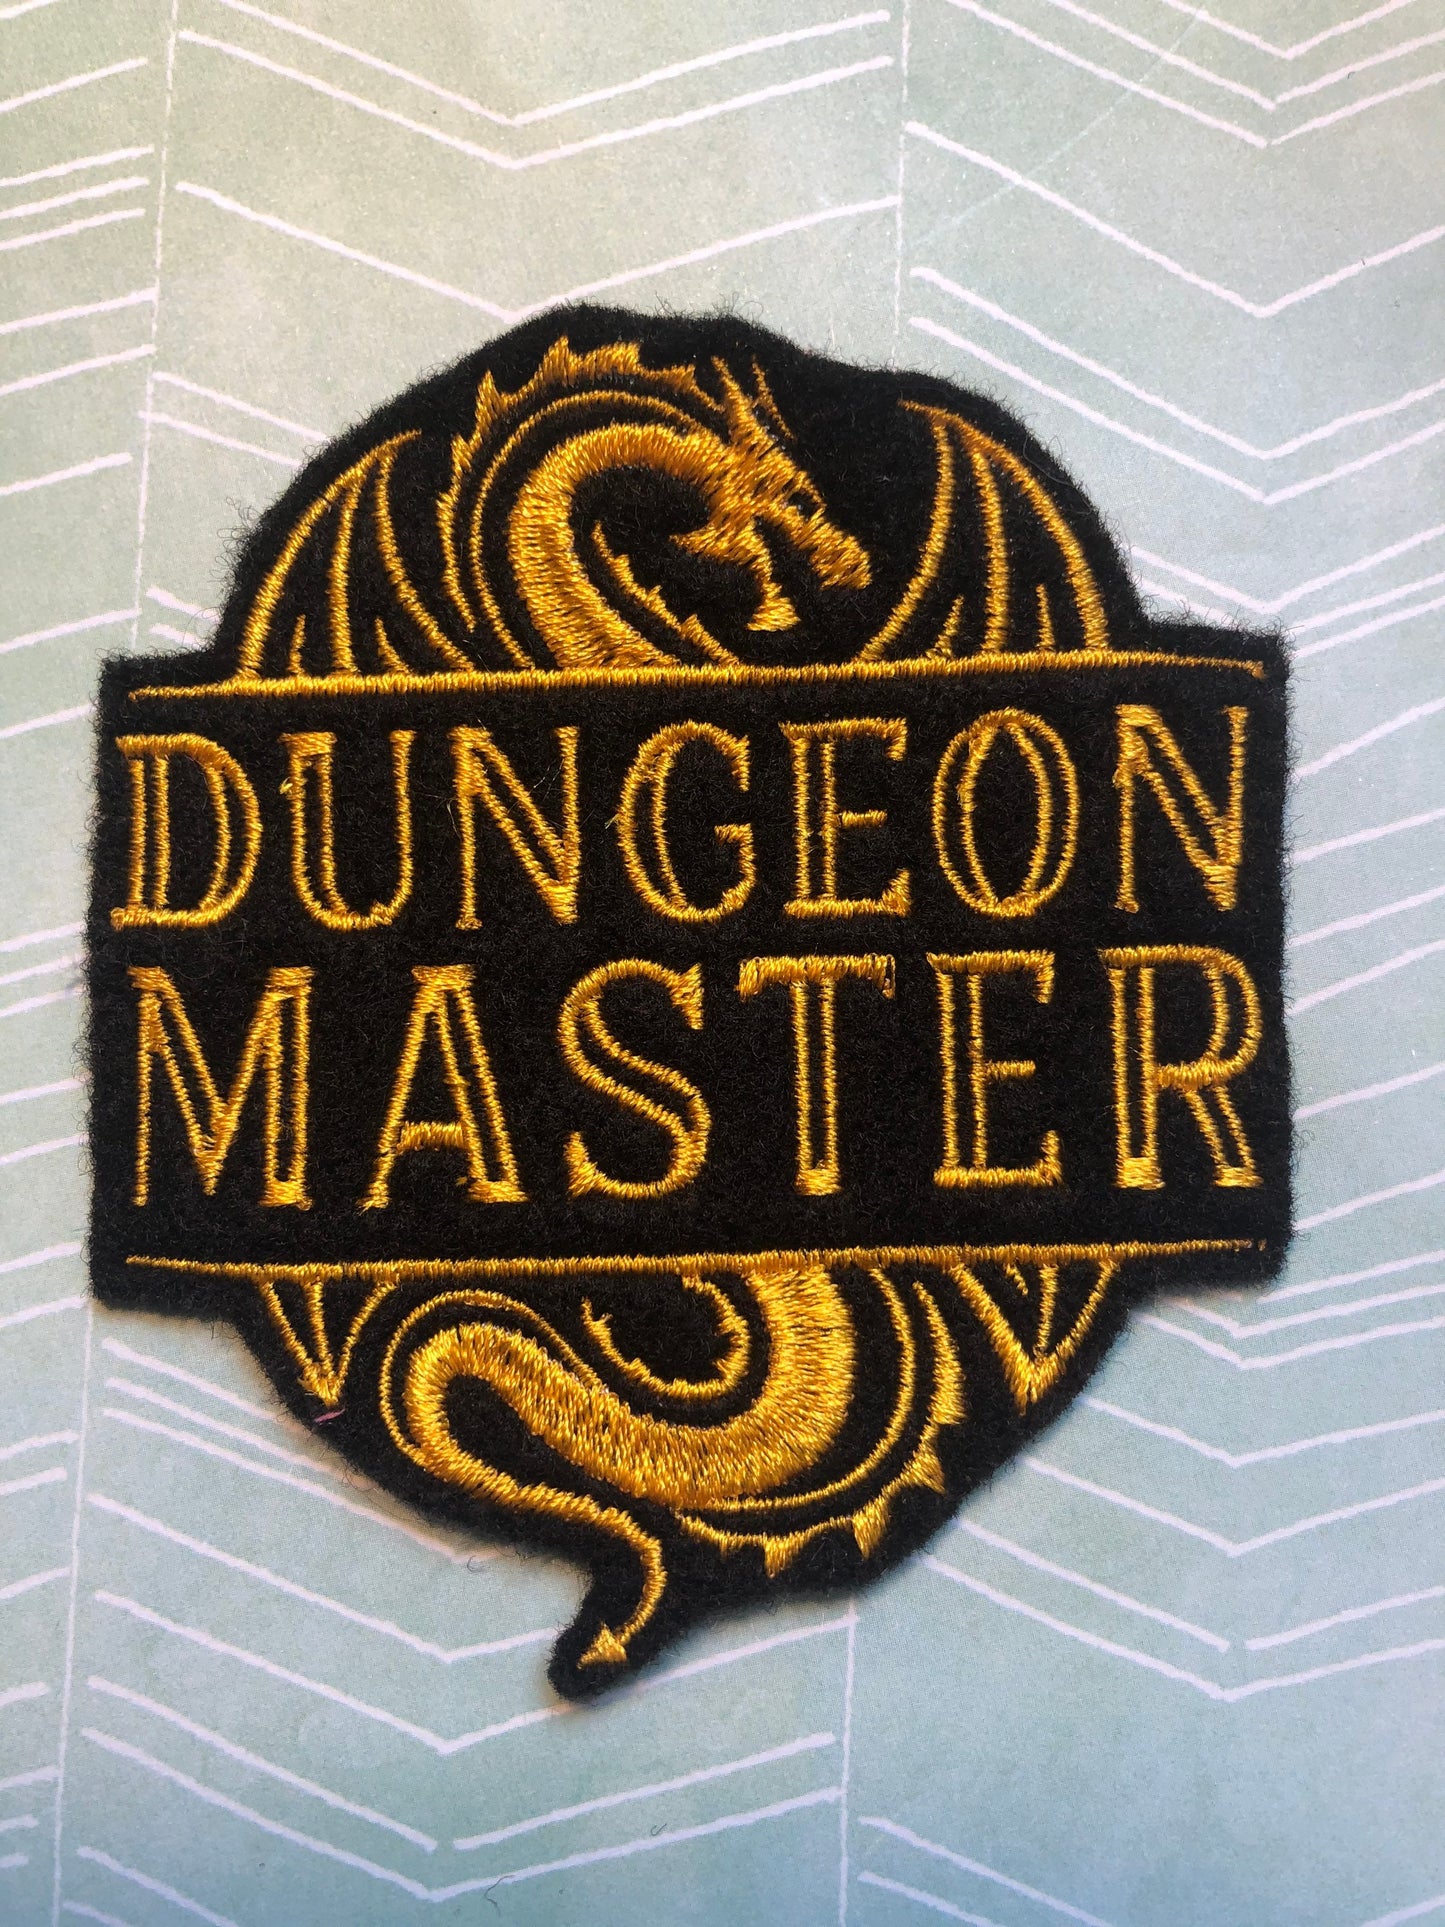 Dungeon Master DM DnD RPG inspired table top game patch